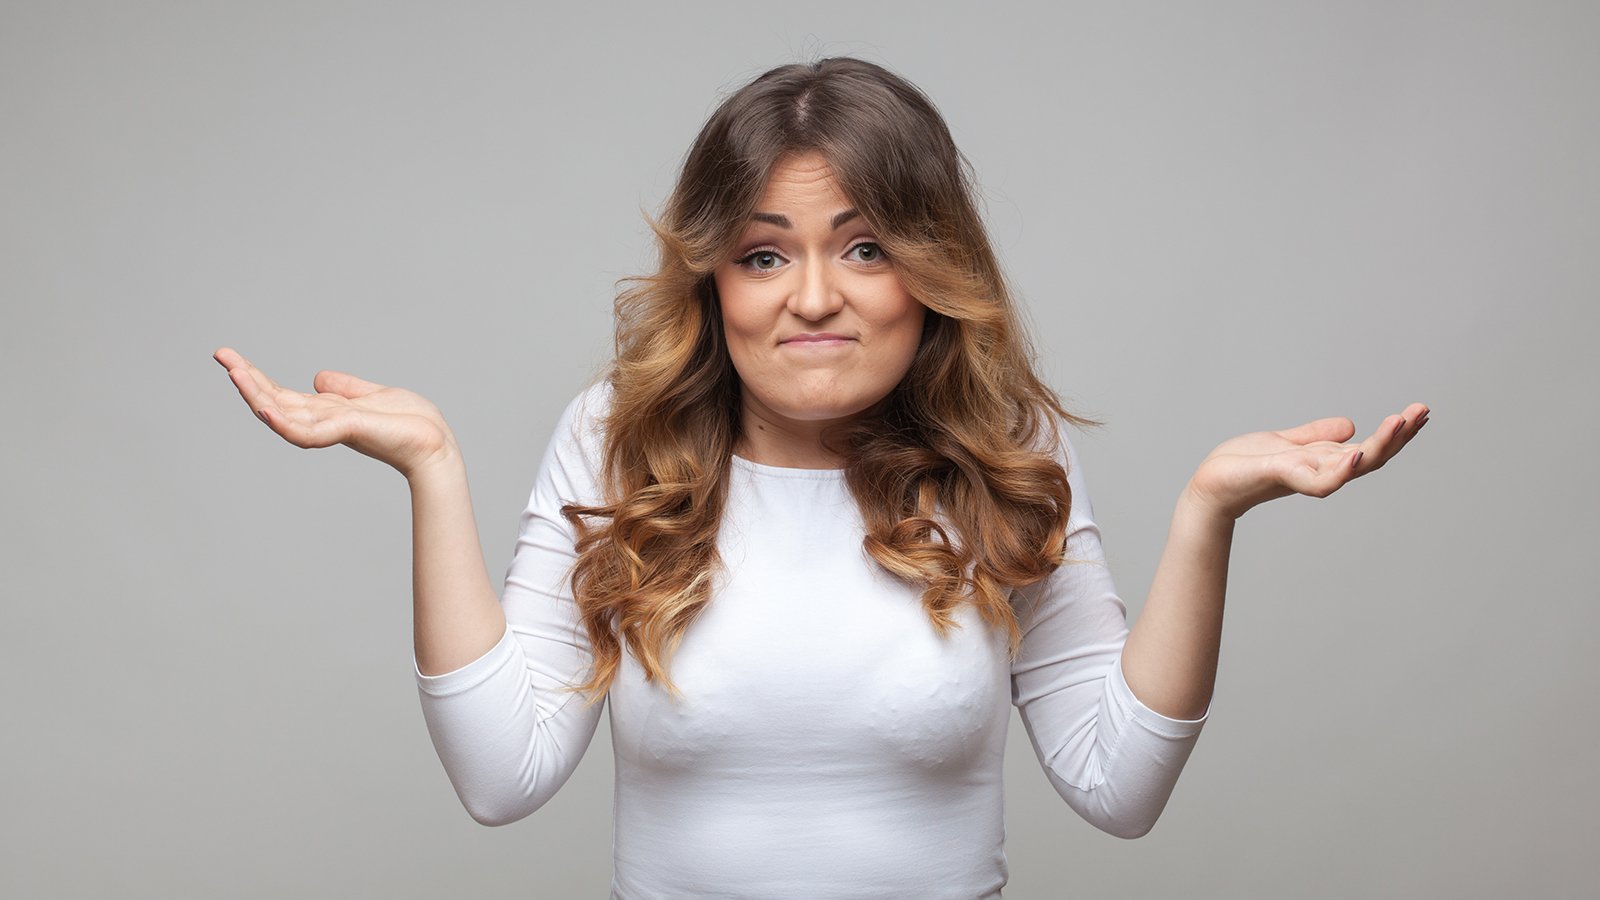 Shrugging woman in doubt doing shrug on grey background